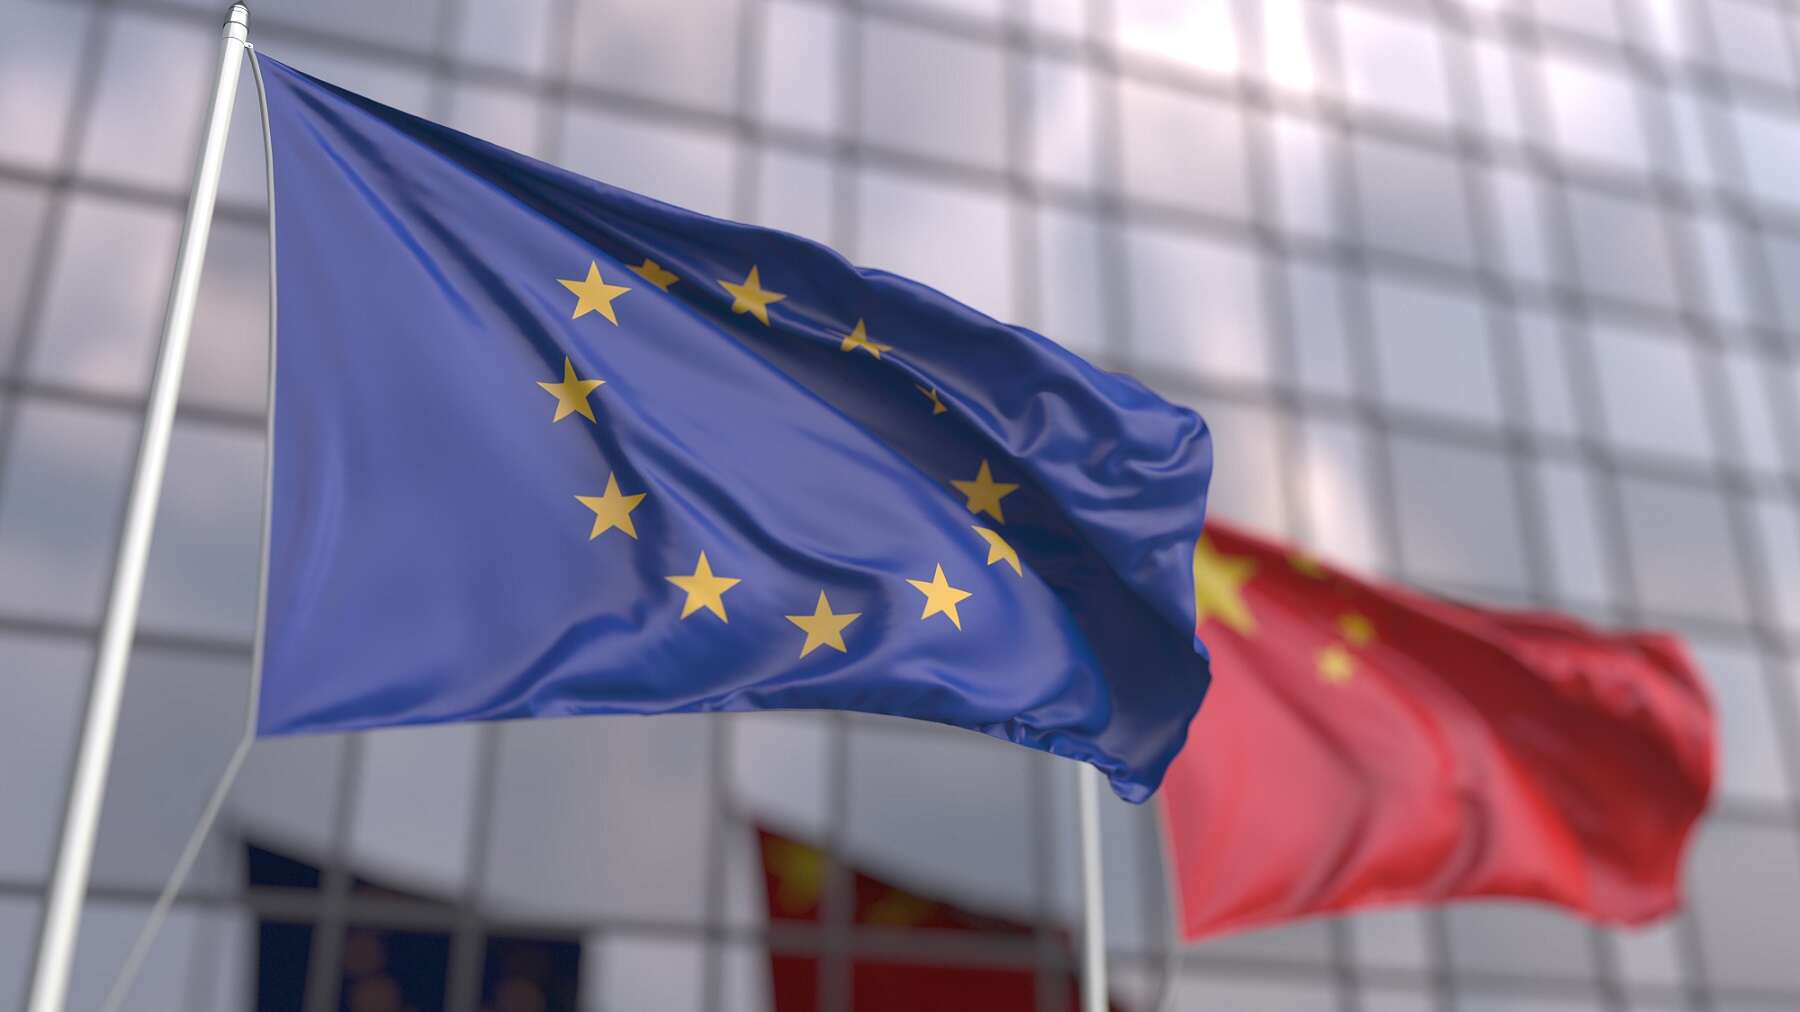 The EU's crackdown on state-subsidised companies is aimed squarely at China